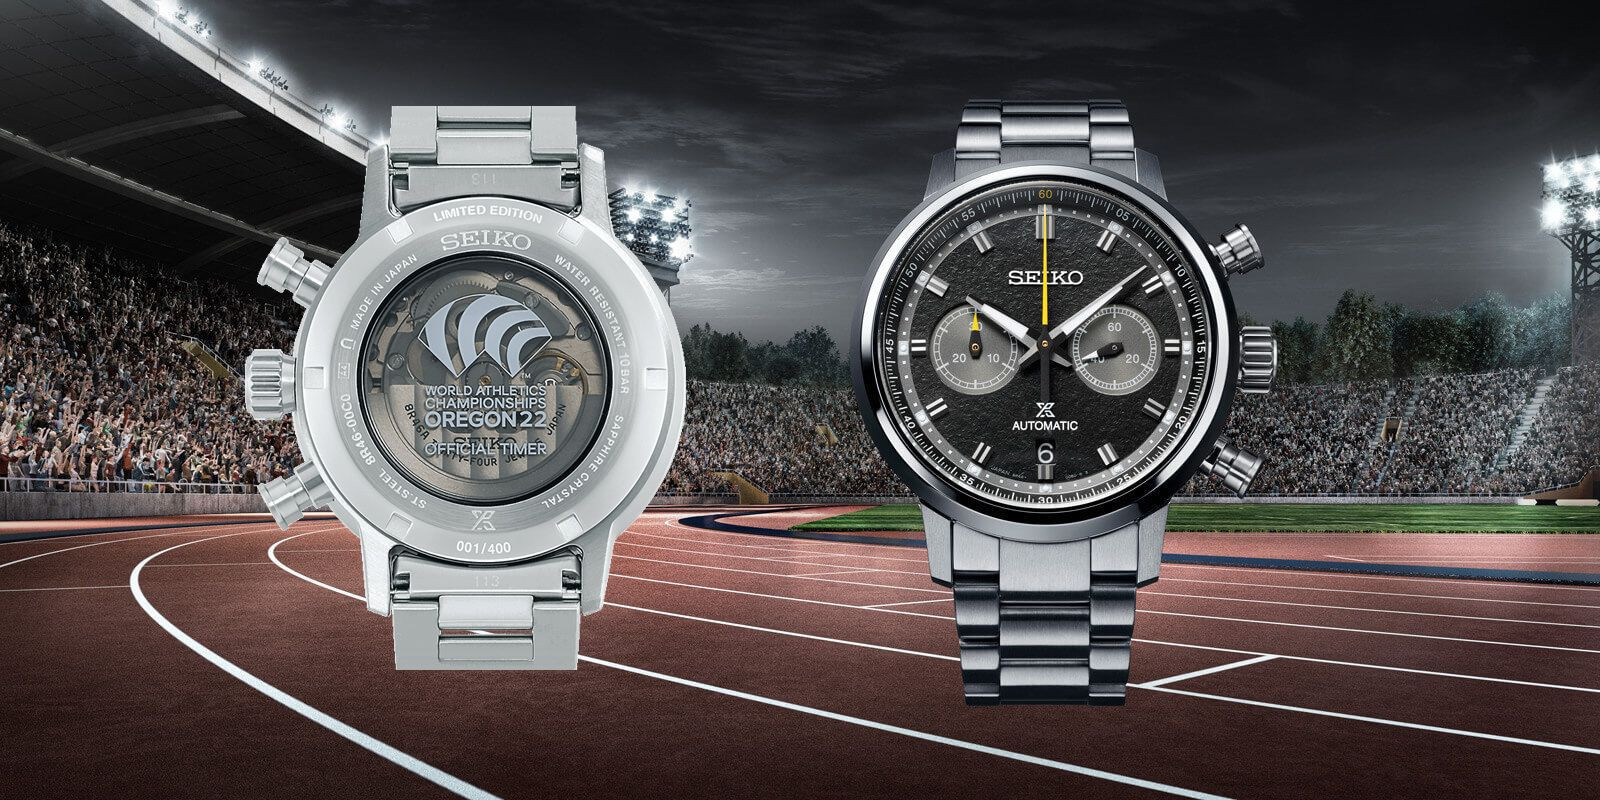 Seiko is to release a limited-edition watch for the 2022 World Athletics Championships ©Seiko